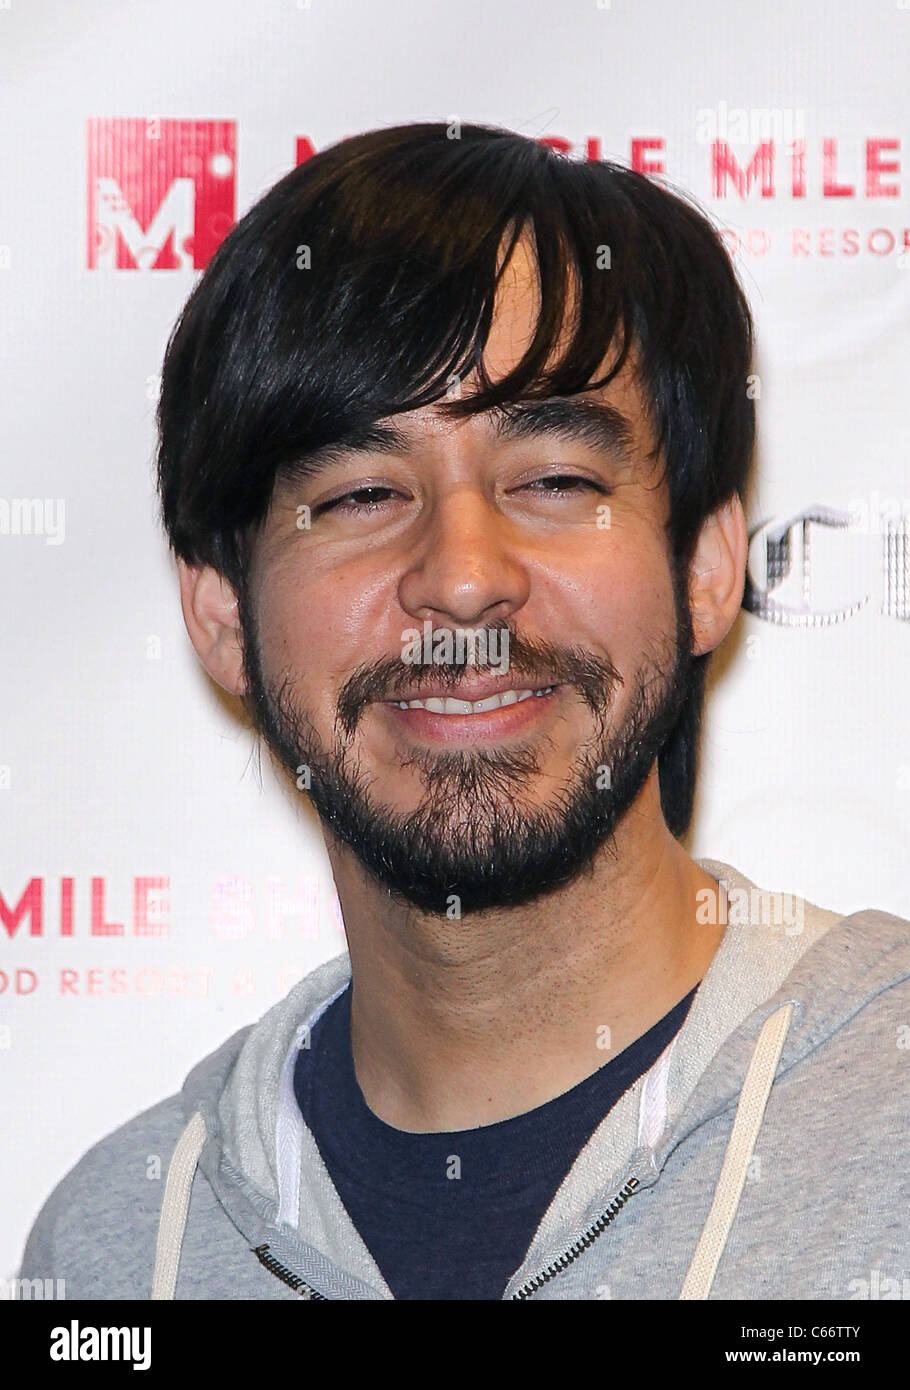 Mike Shinoda in attendance for Linkin Park Autograph Signing at Club Tattoo, Miracle Mile Shops at Planet Hollywood Resort and Casino, Las Vegas, NV February 19, 2011. Photo By: MORA/Everett Collection Stock Photo